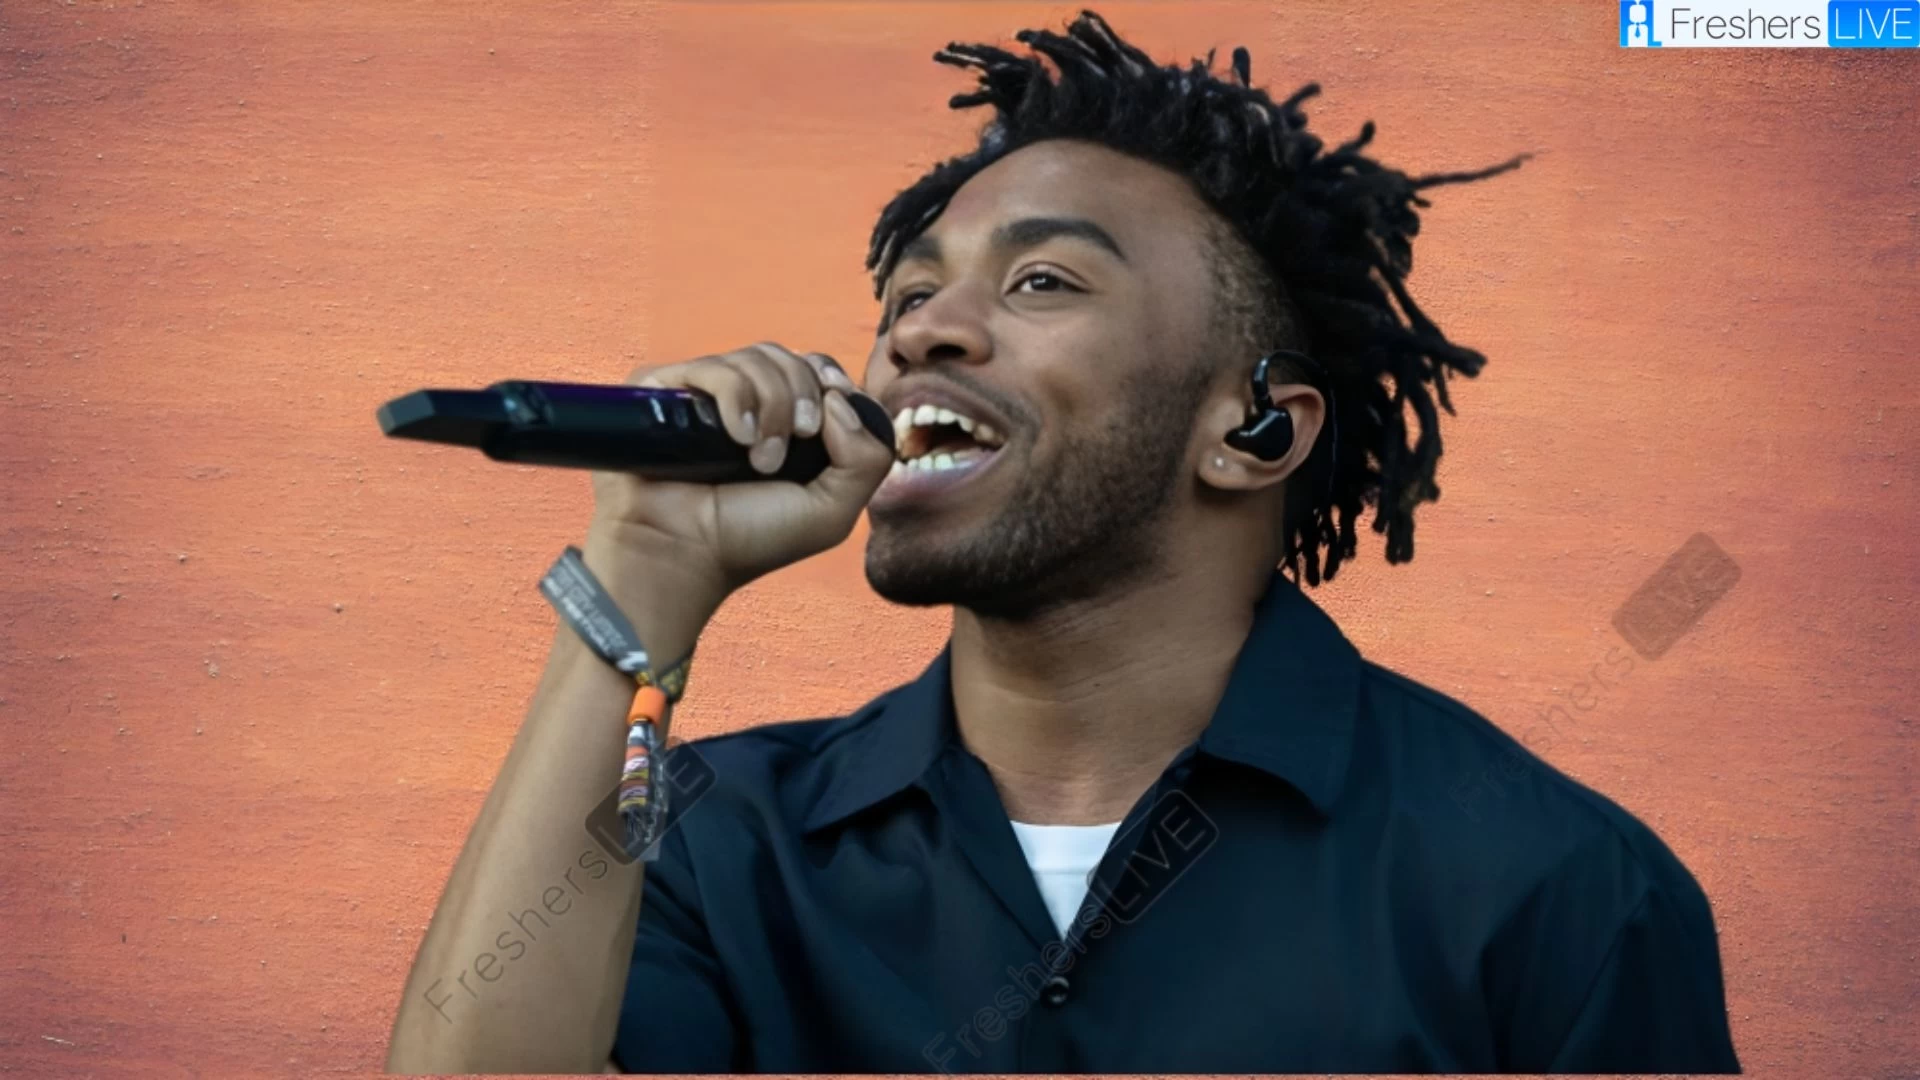 Kevin Abstract Ethnicity, What is Kevin Abstract's Ethnicity?